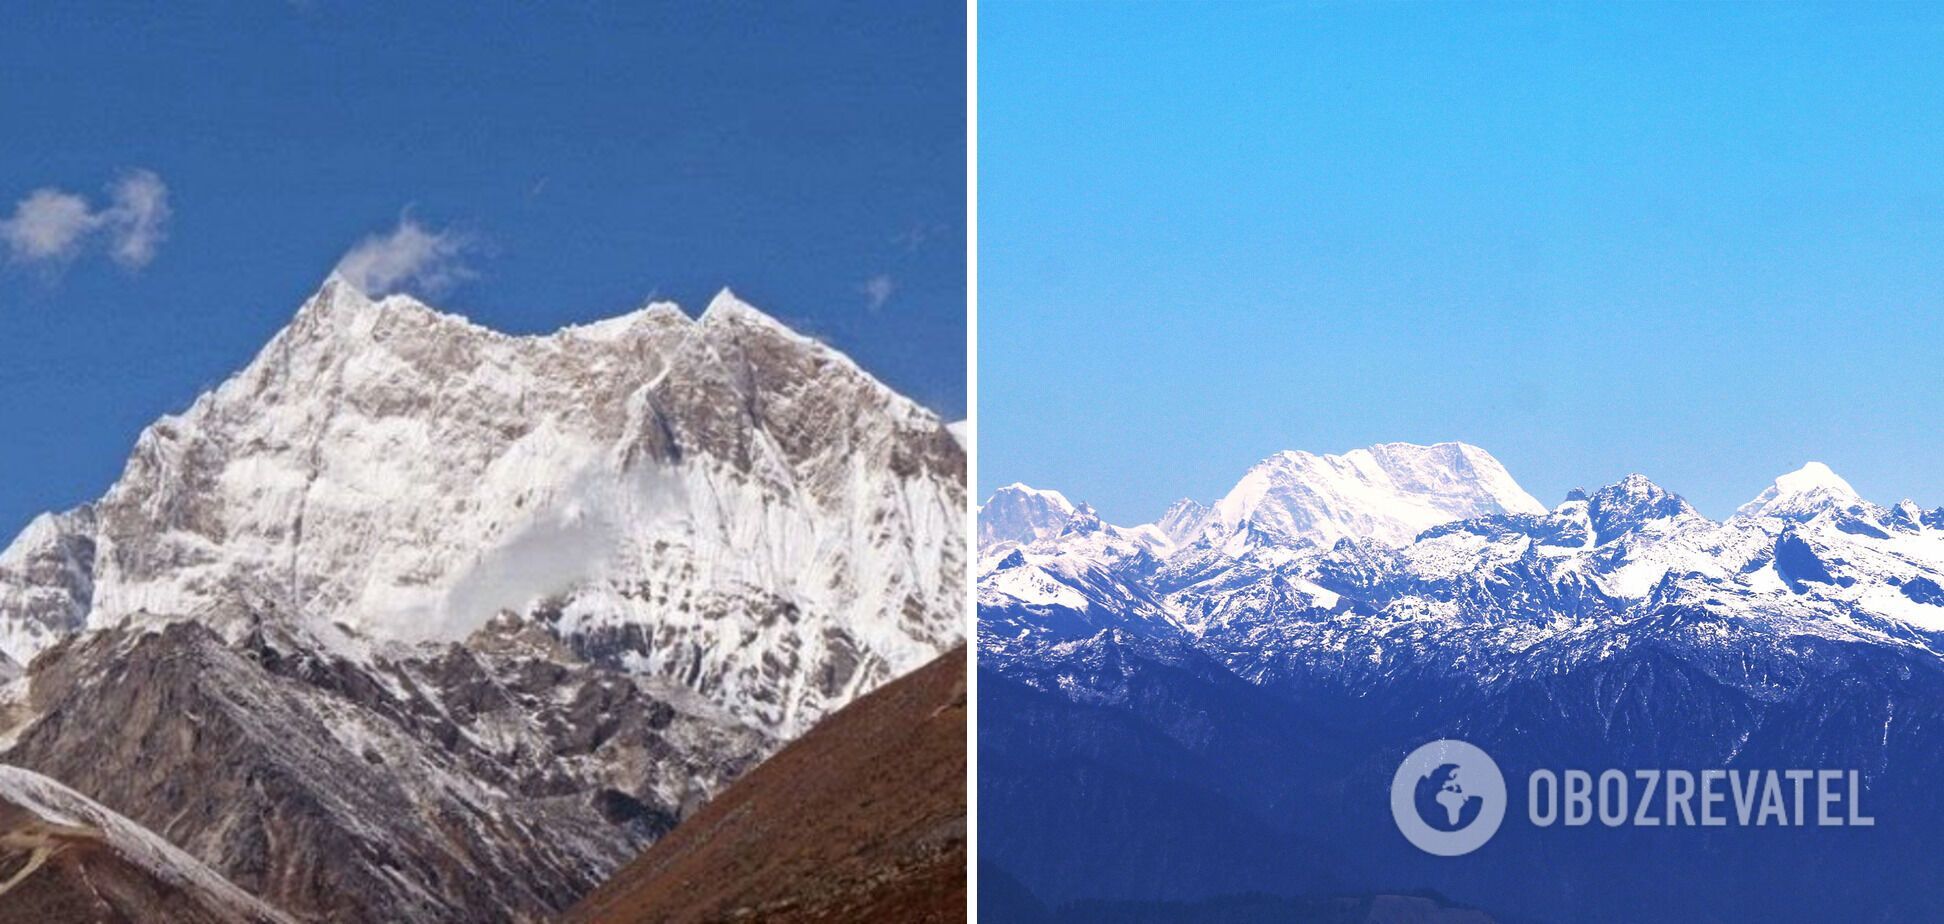 Gangkhar Puensum is considered the highest unclimbed peak in the world